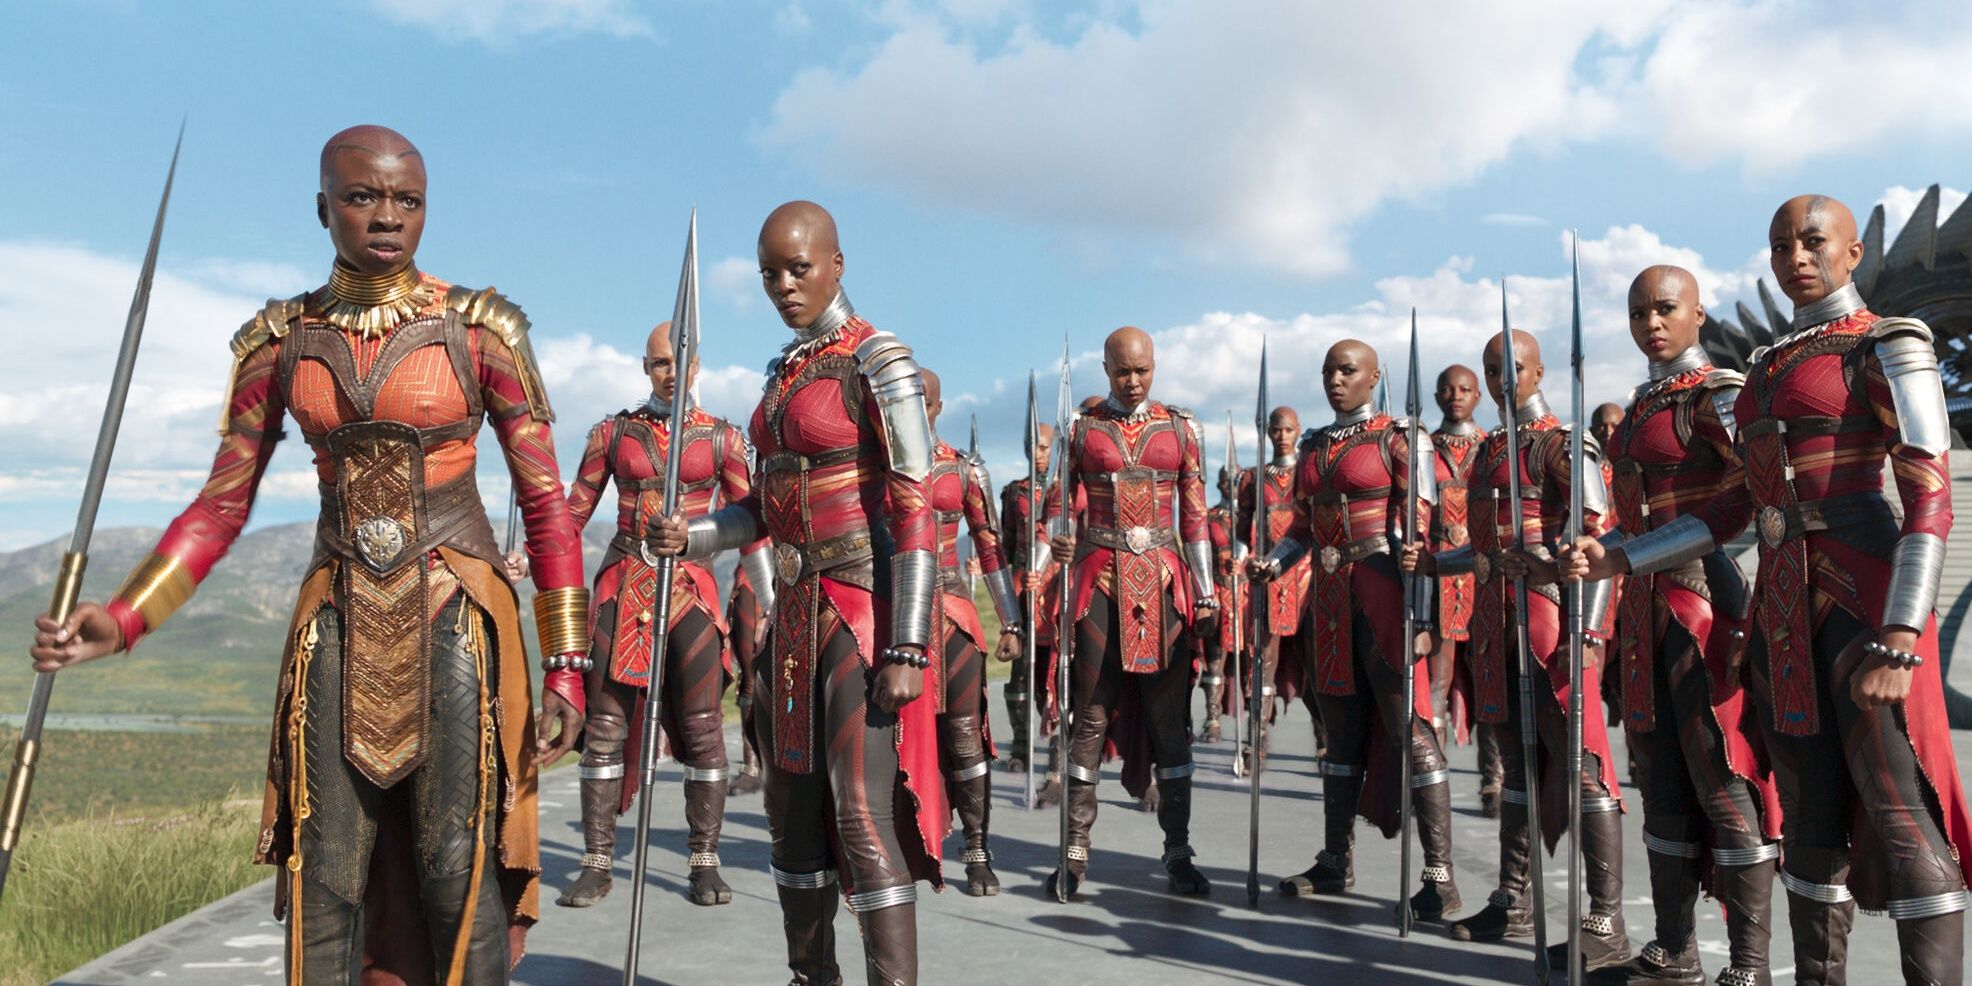 The Dora Milaje in battle formation Cropped